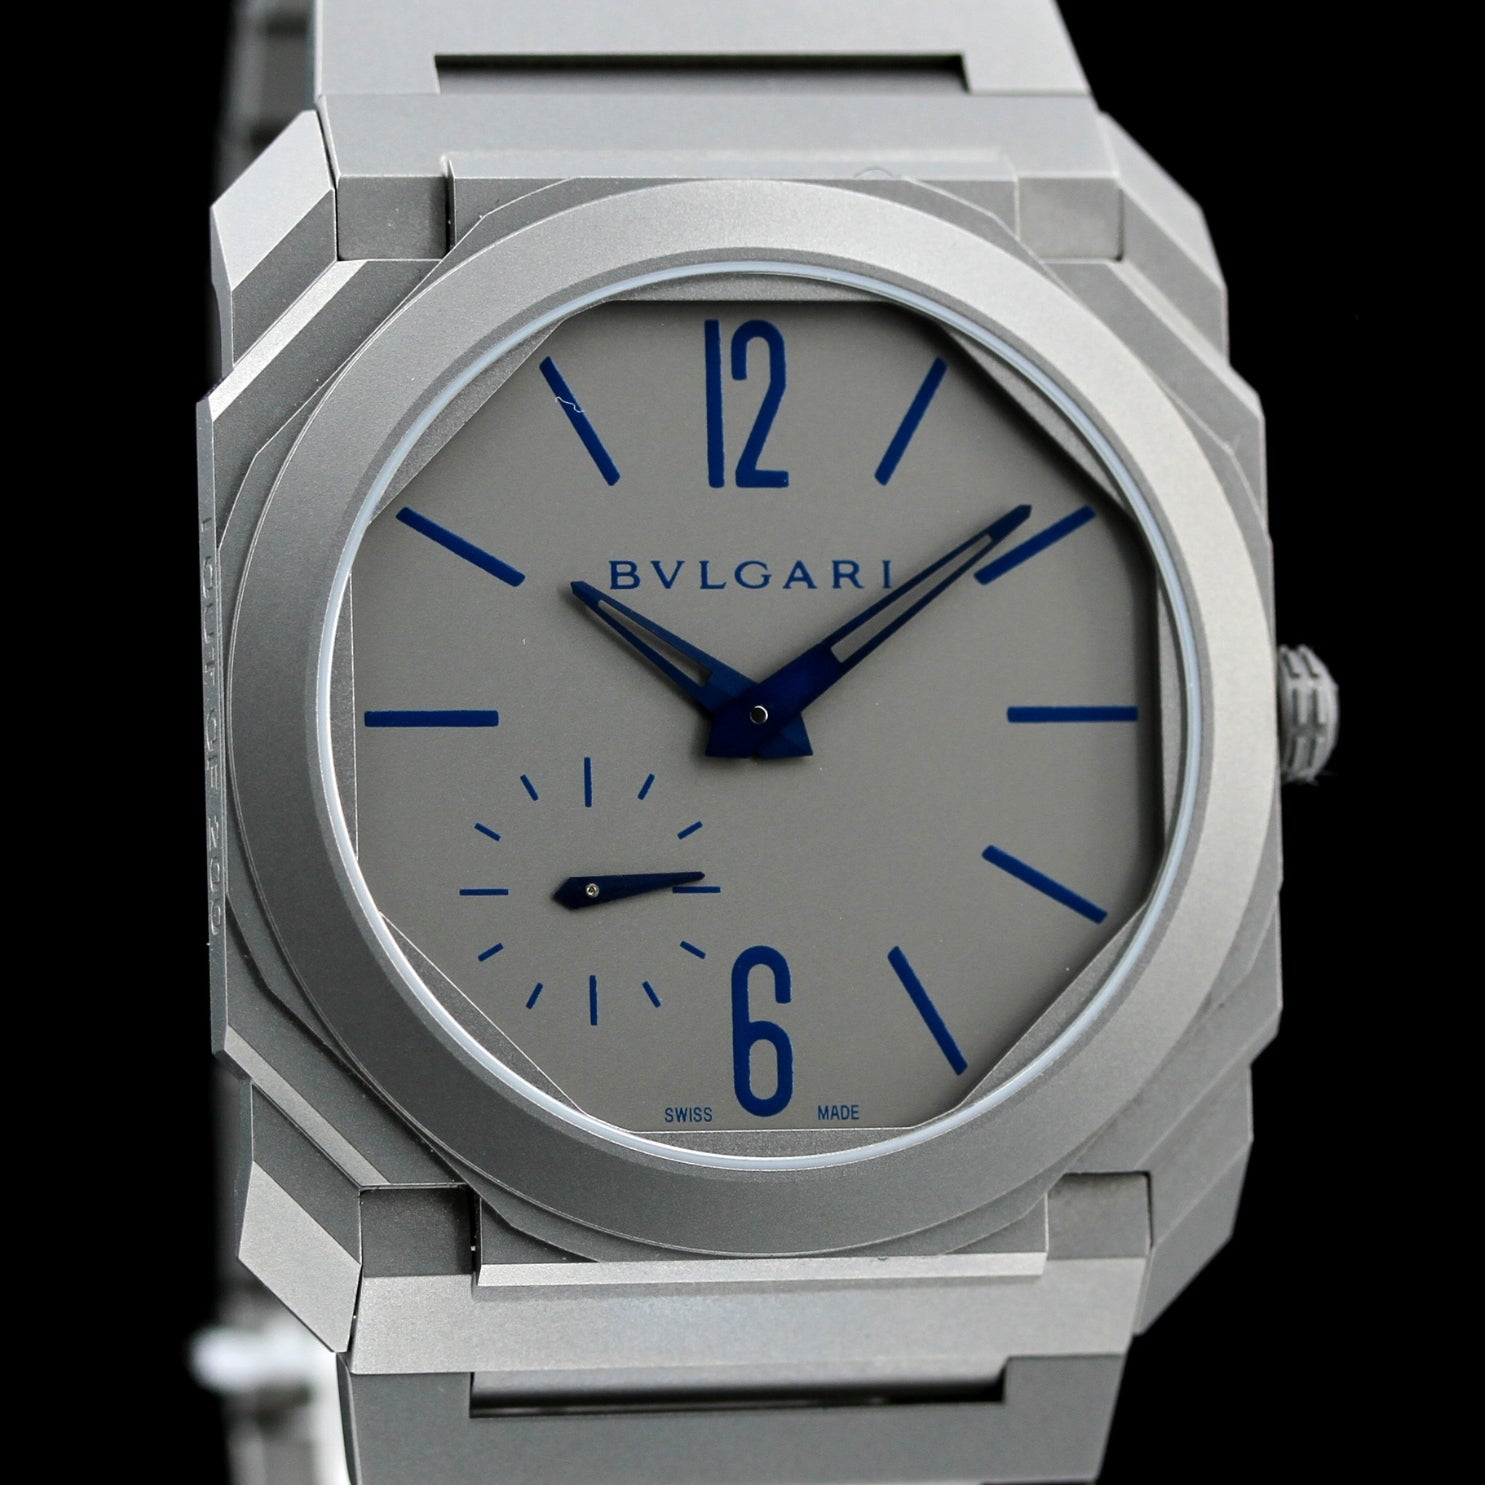 Bulgari Octa Finissimo, limited 1 out of 200, Ref. 102945, 2019, B+P - LUXUHRIA